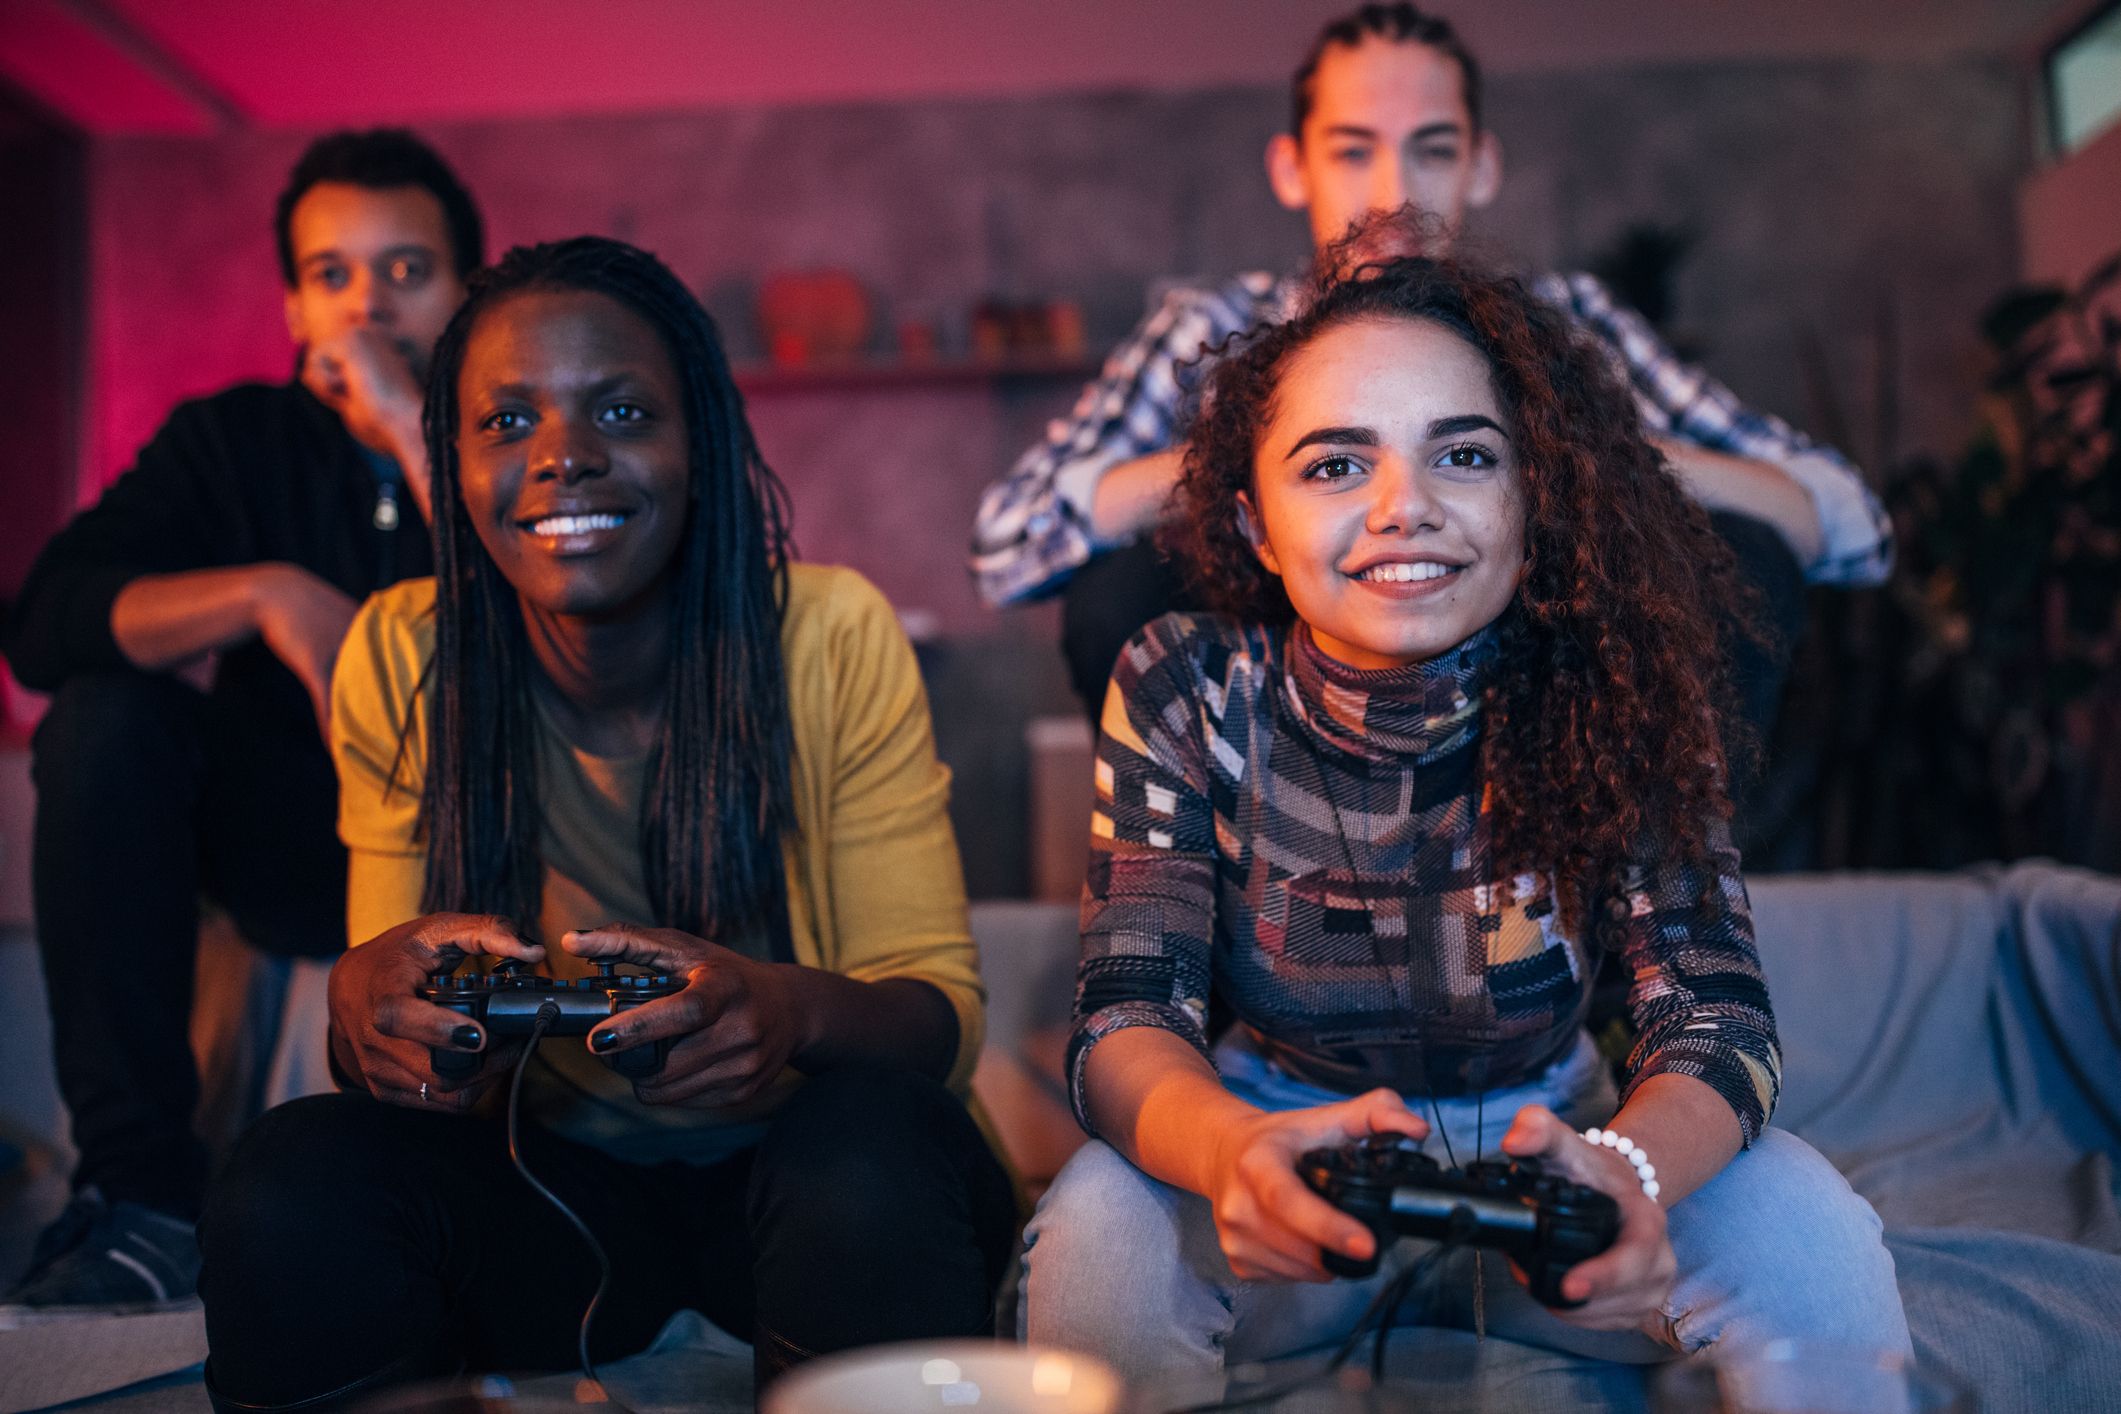 A group of four teenagers play videogames on a couch.